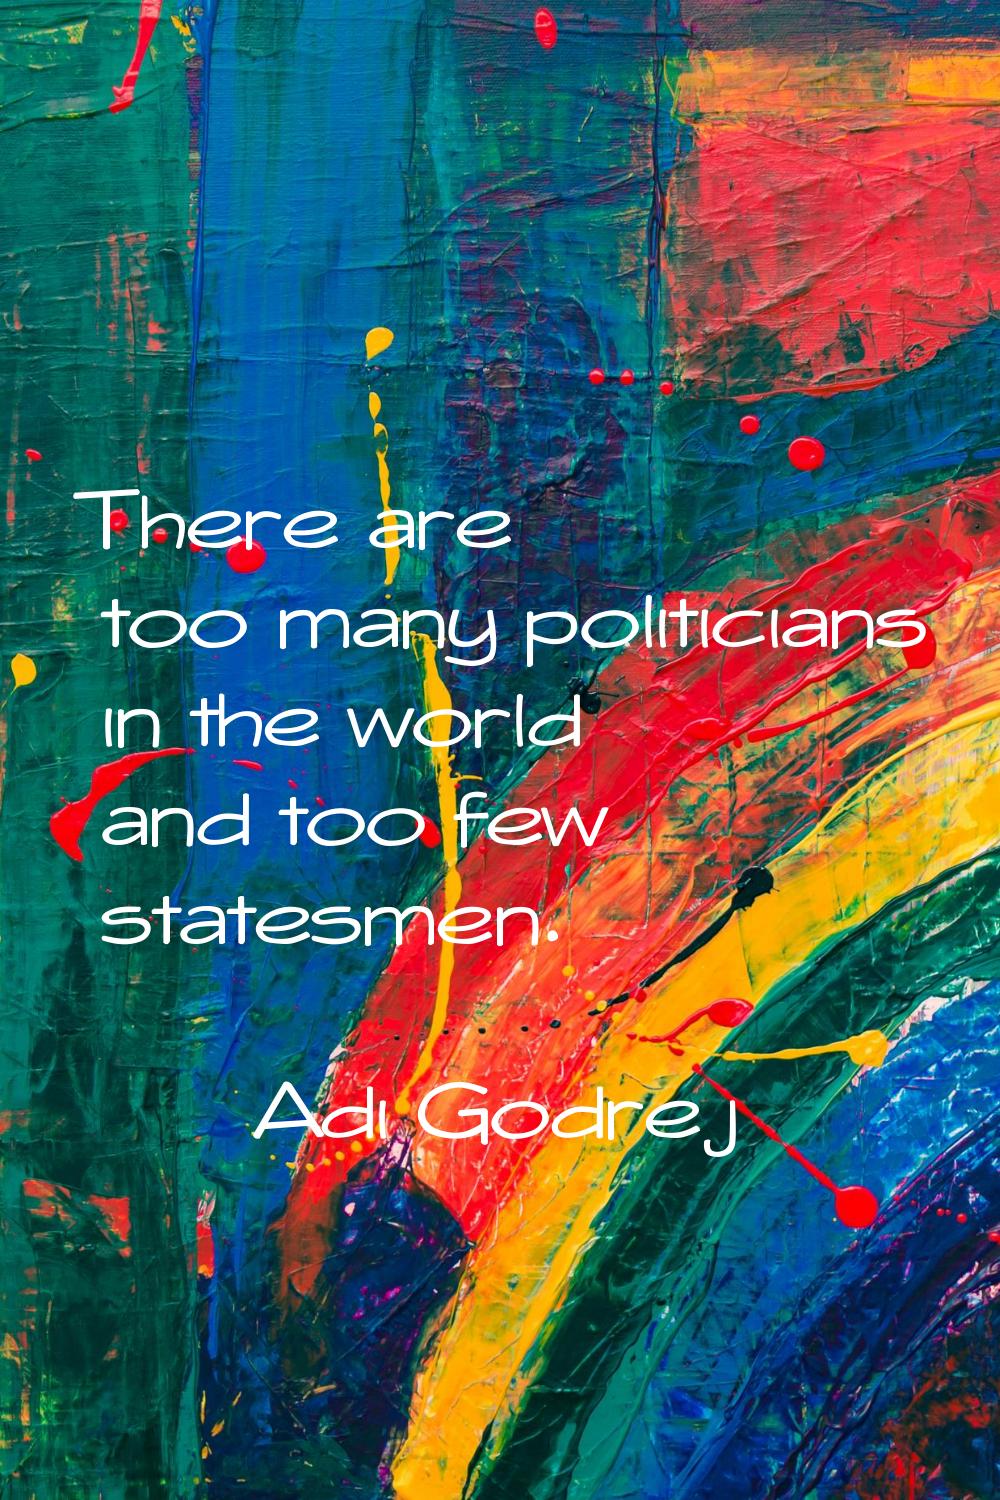 There are too many politicians in the world and too few statesmen.